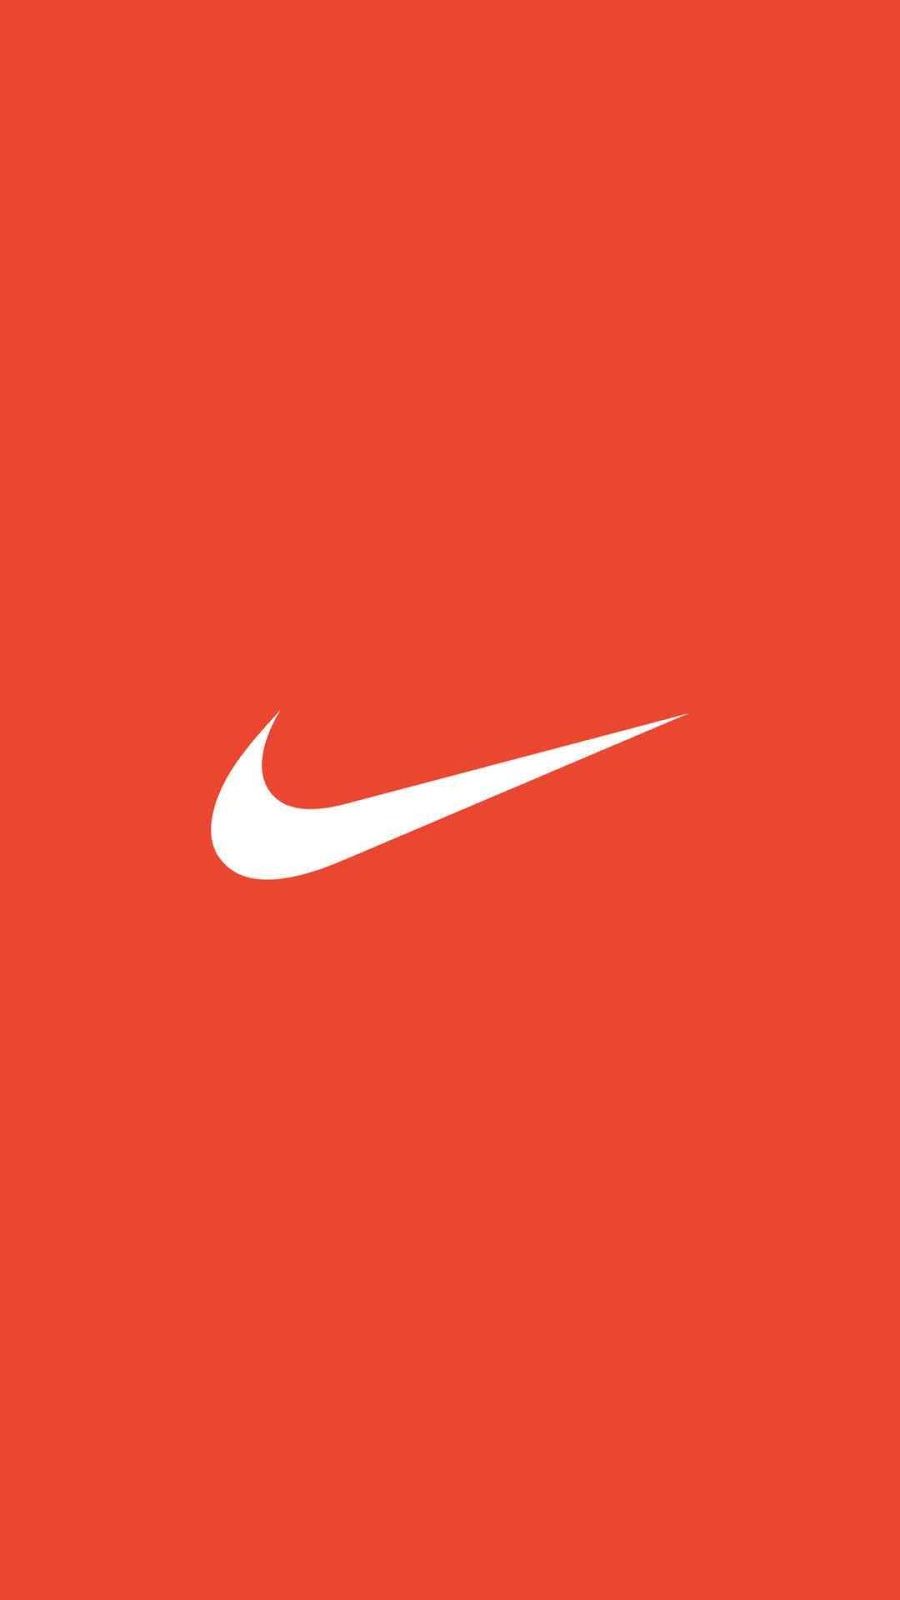 Nike Logo HD Wallpaper For iPhone X, iPhone XR, iPhone Etc. Nike wallpaper, Nike logo wallpaper, HD wallpaper iphone